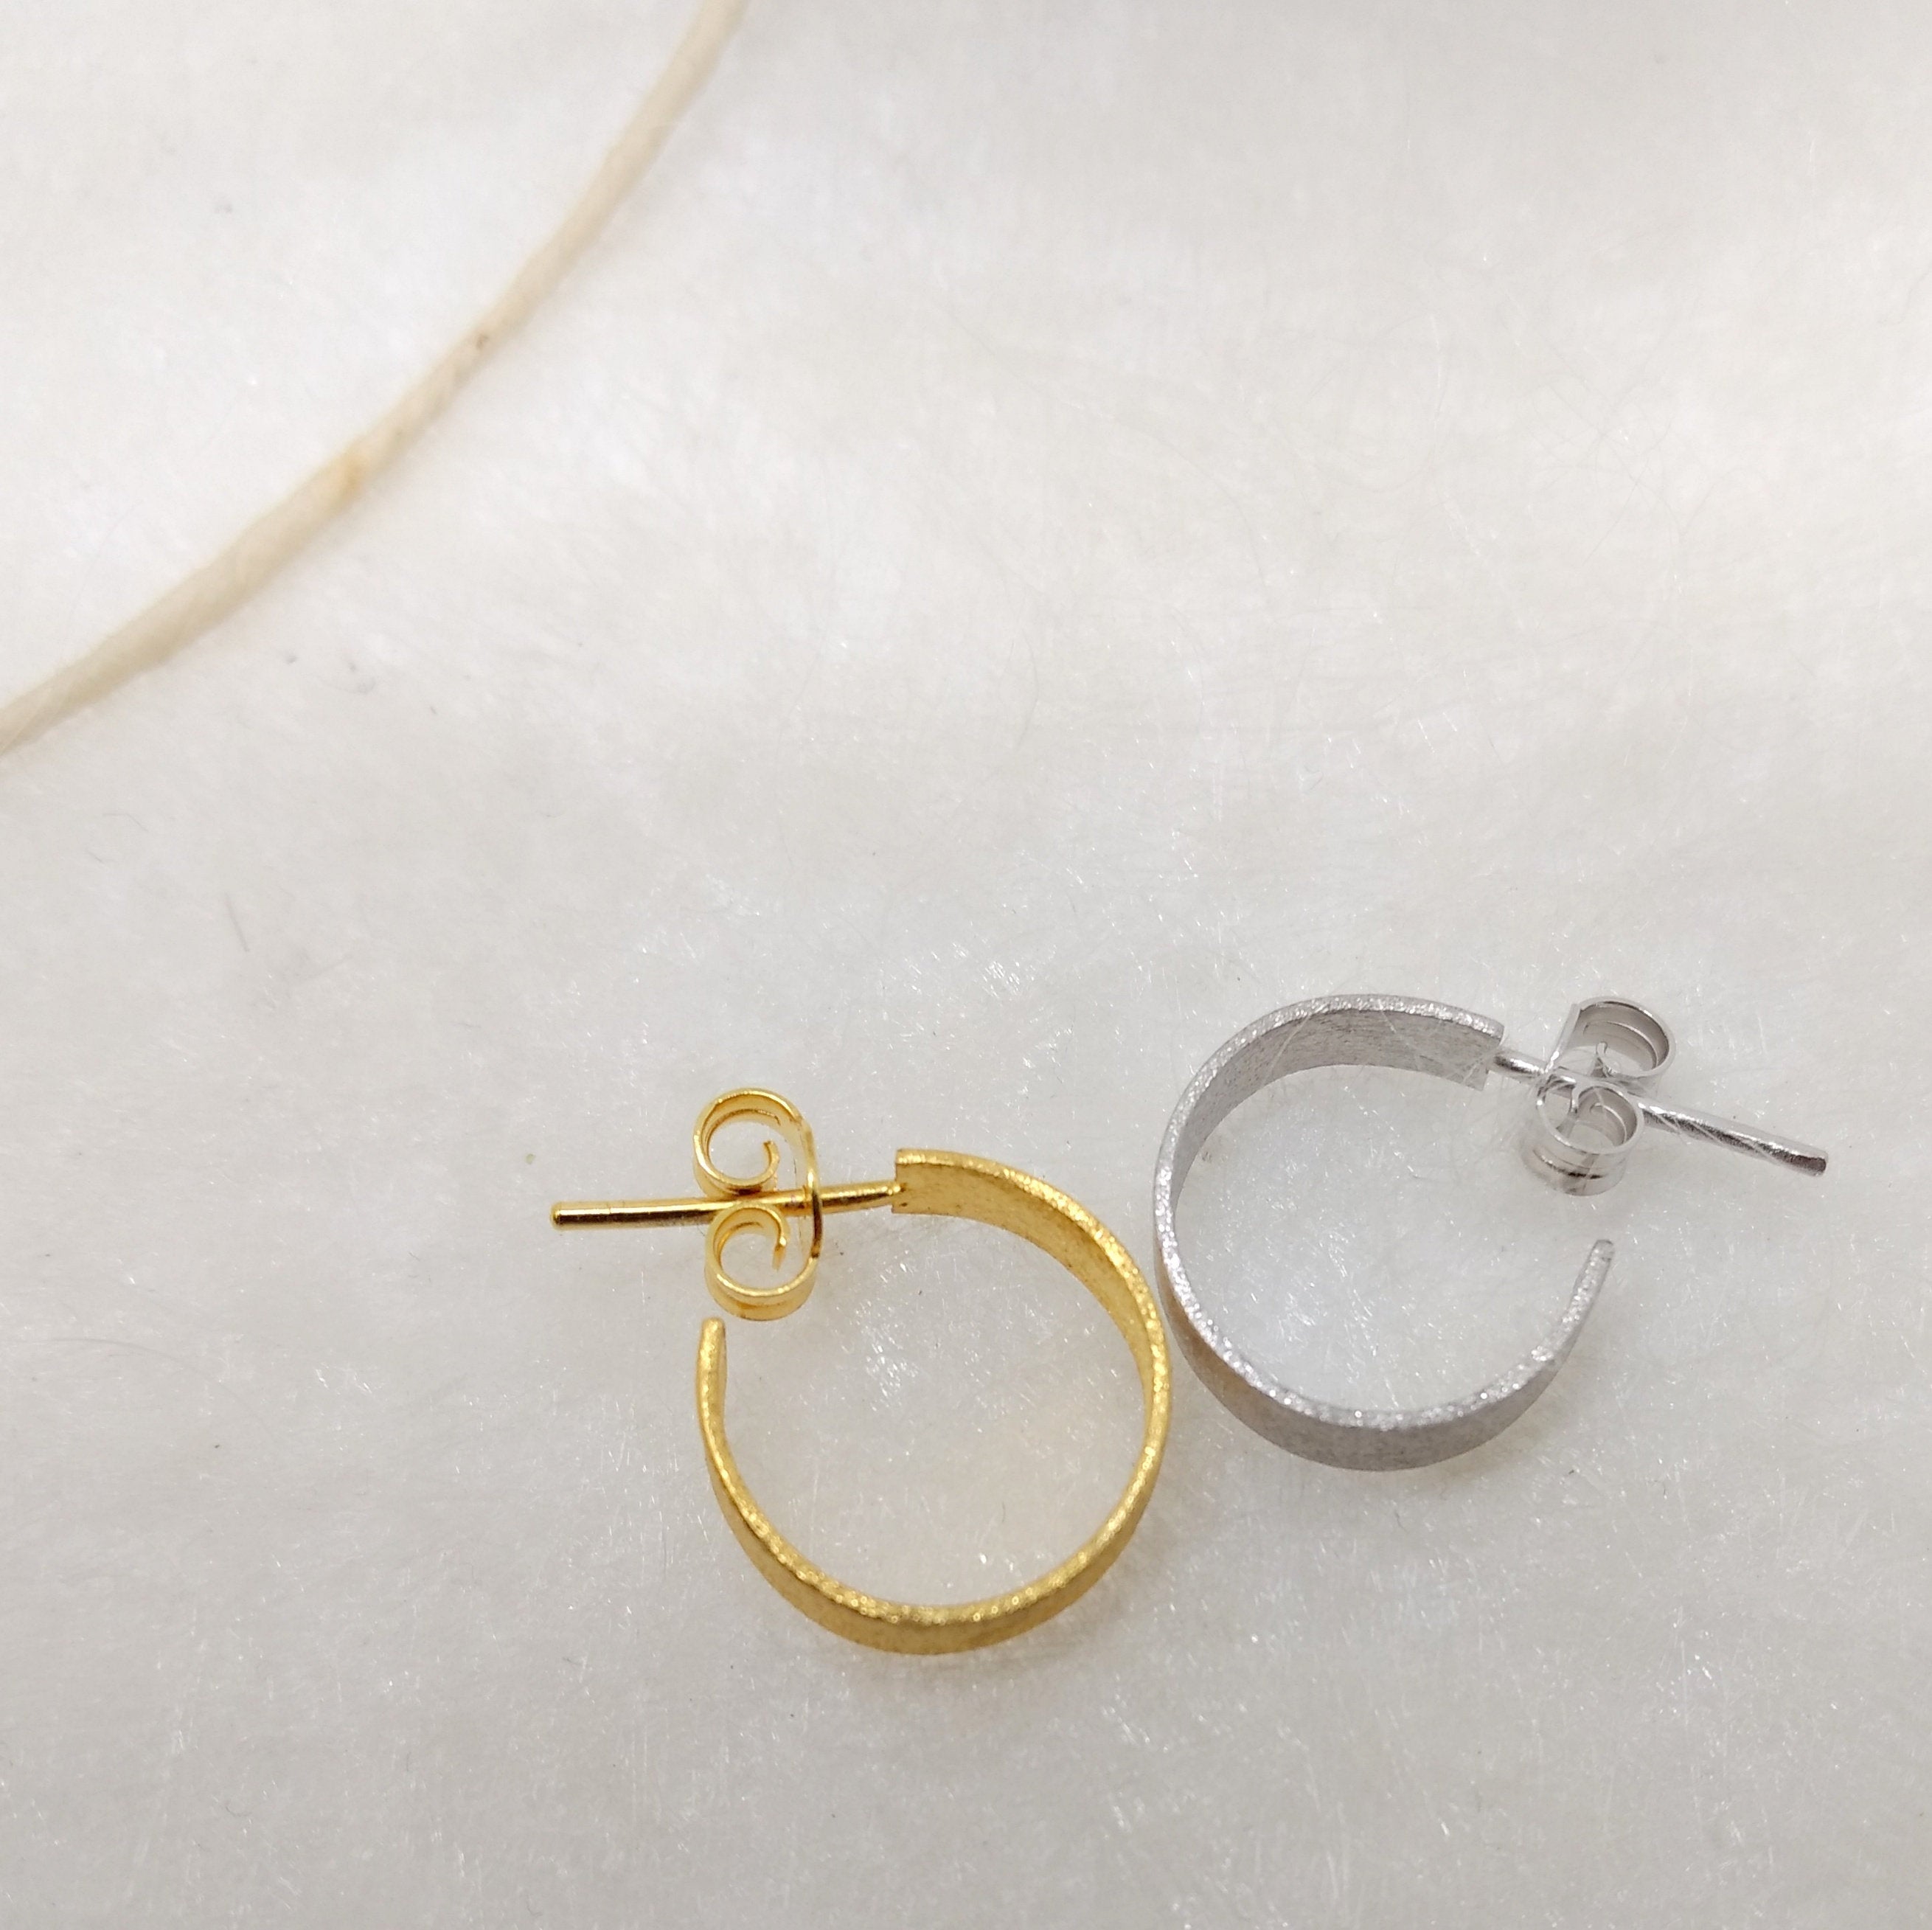 ImNos - small (ø 14 mm) Sterling Siver hoops, rhodium or gold plated